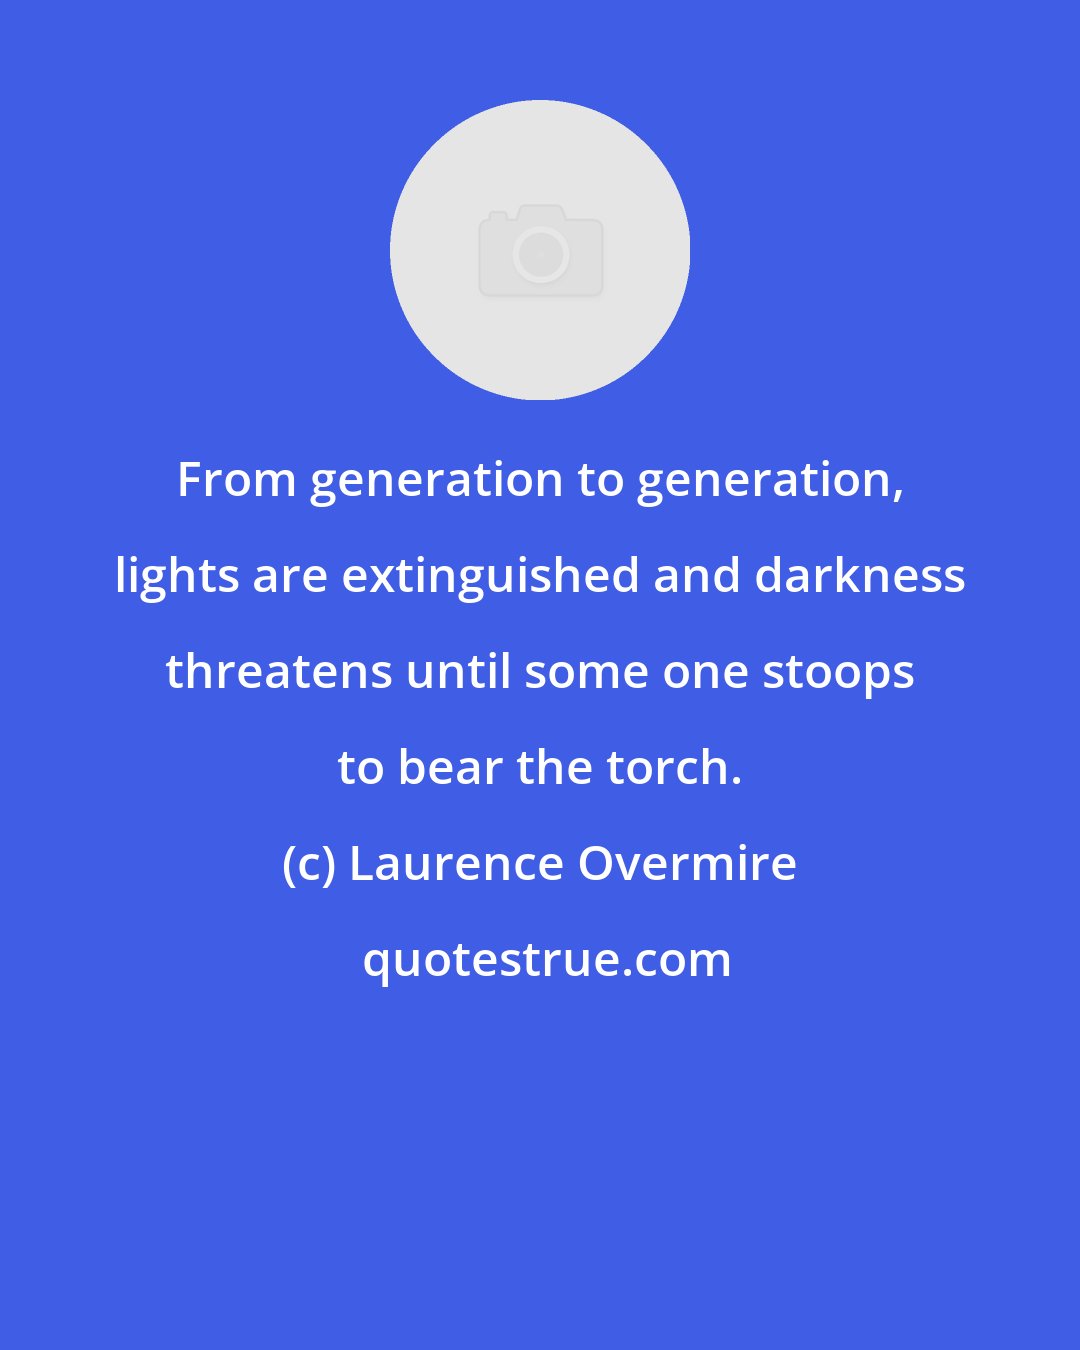 Laurence Overmire: From generation to generation, lights are extinguished and darkness threatens until some one stoops to bear the torch.